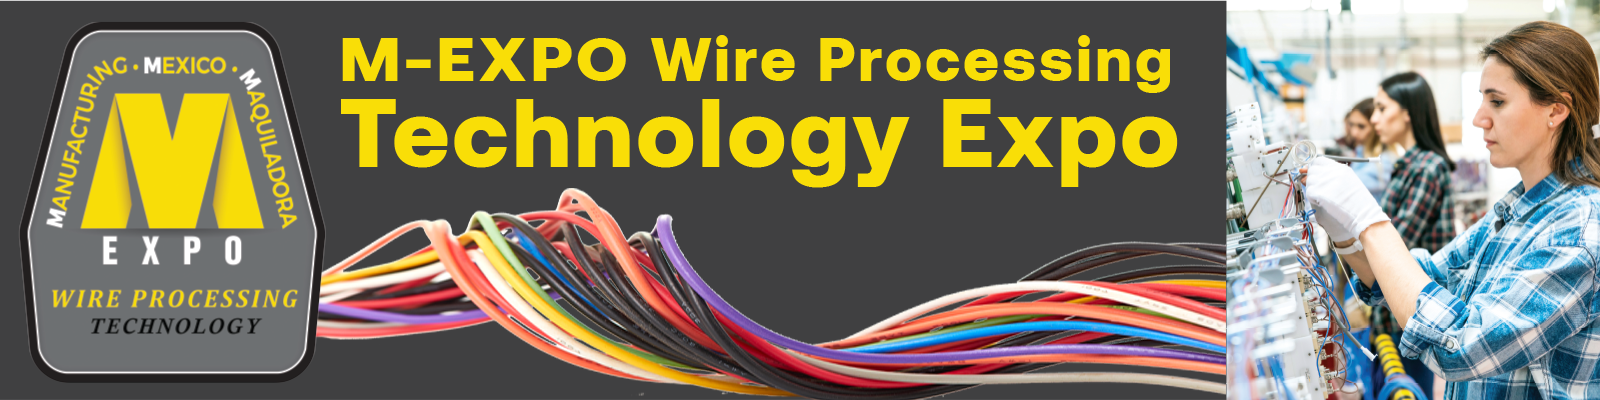 M-EXPO Wire Processing Technology Expo